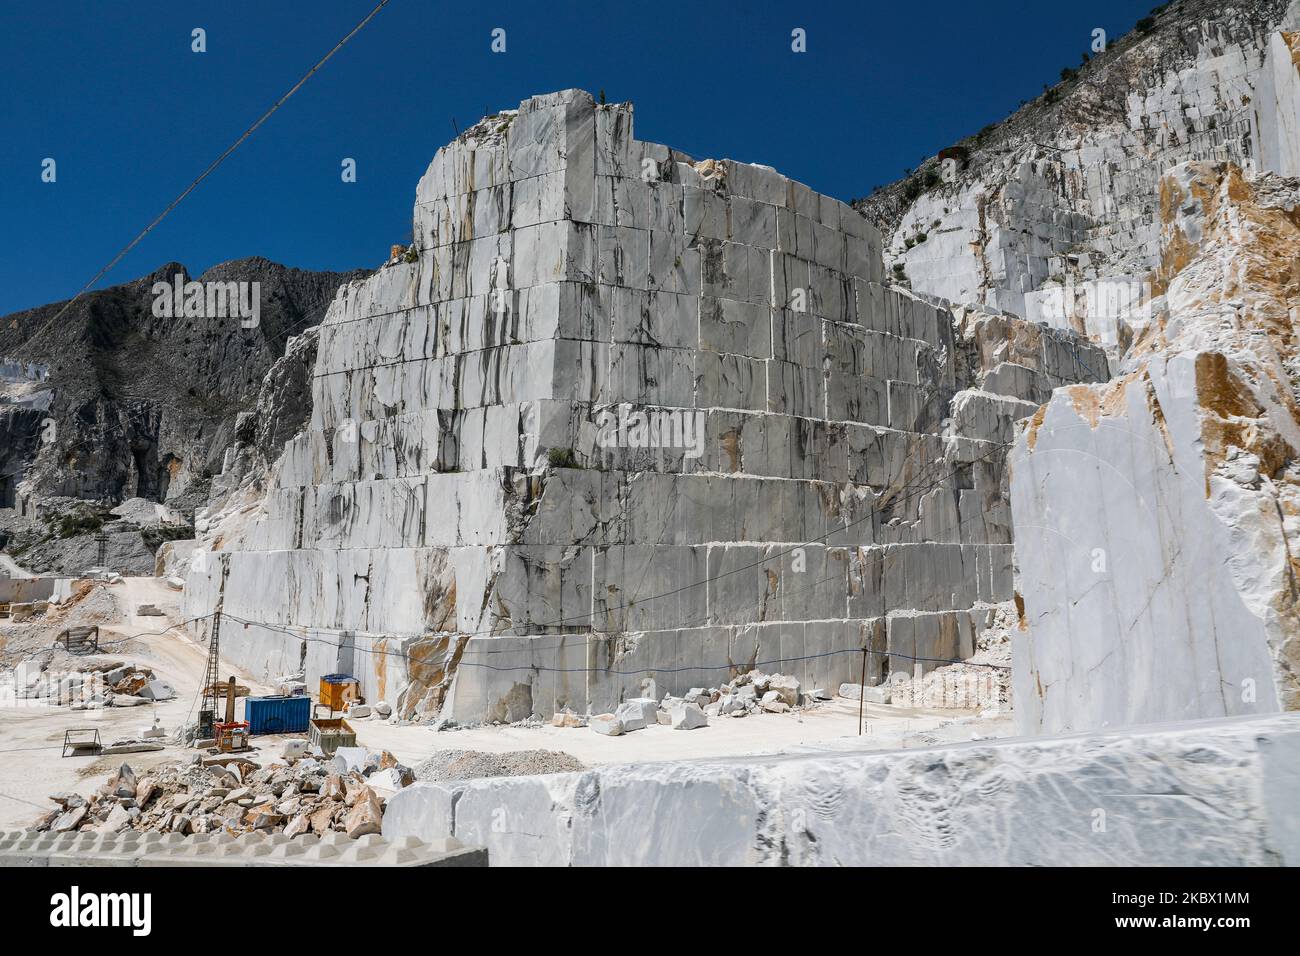 The landscape of the quarries of Colonnata. The Carrara quarries were famous through millennia and have been Statuario, a pure white marble now extinct. Carrara marble has been used since the time of Ancient Rome and it was also used in many sculptures of the Renaissance including Michelangelo's David. In Massa Carrara, Tuscany, Apuan Alps, Italy, on July 29, 2020. (Photo by Mauro Ujetto/NurPhoto) Stock Photo